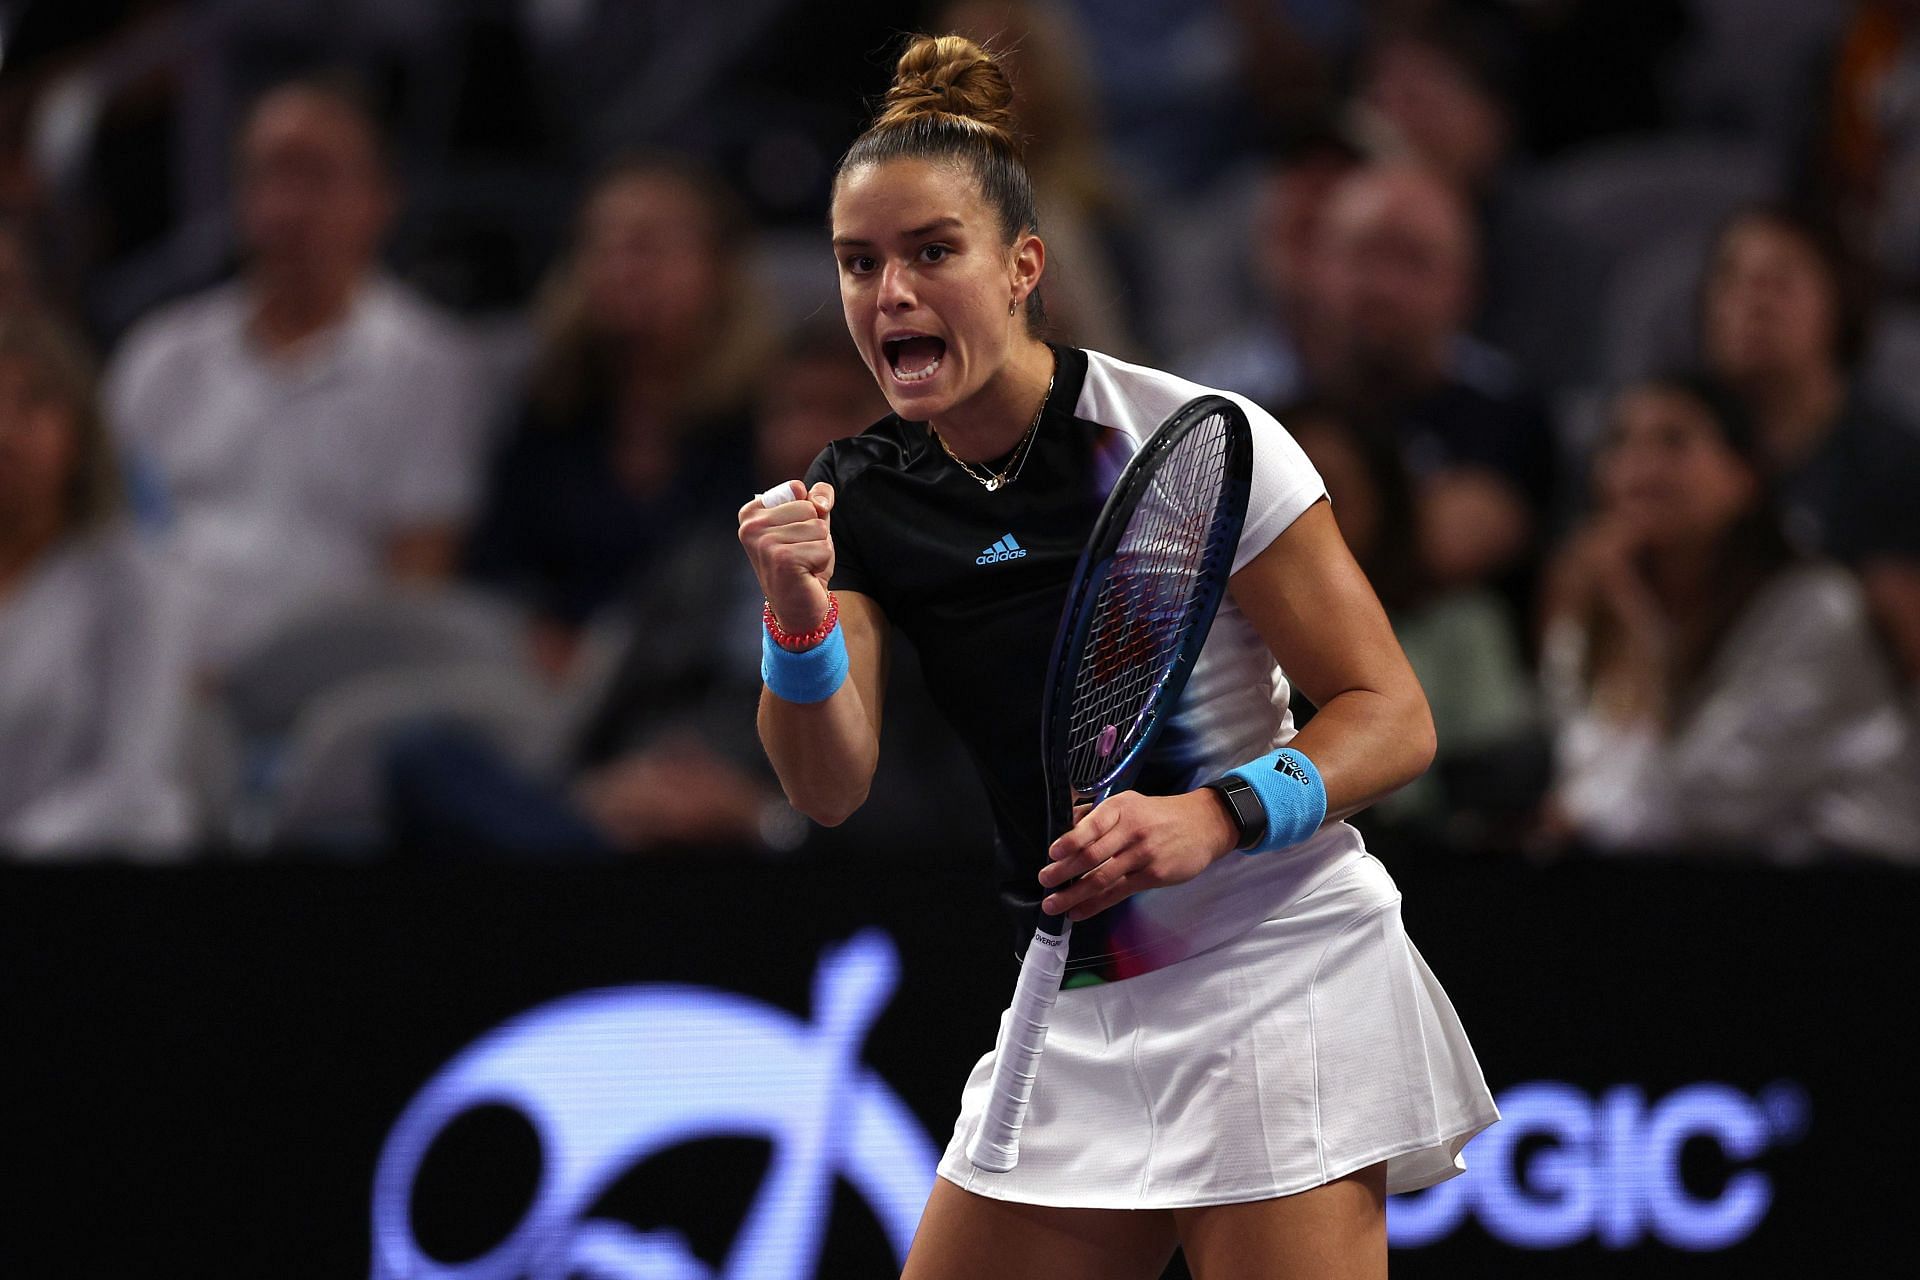 Maria Sakkari has booked her place in the semifinals of the WTA Finals